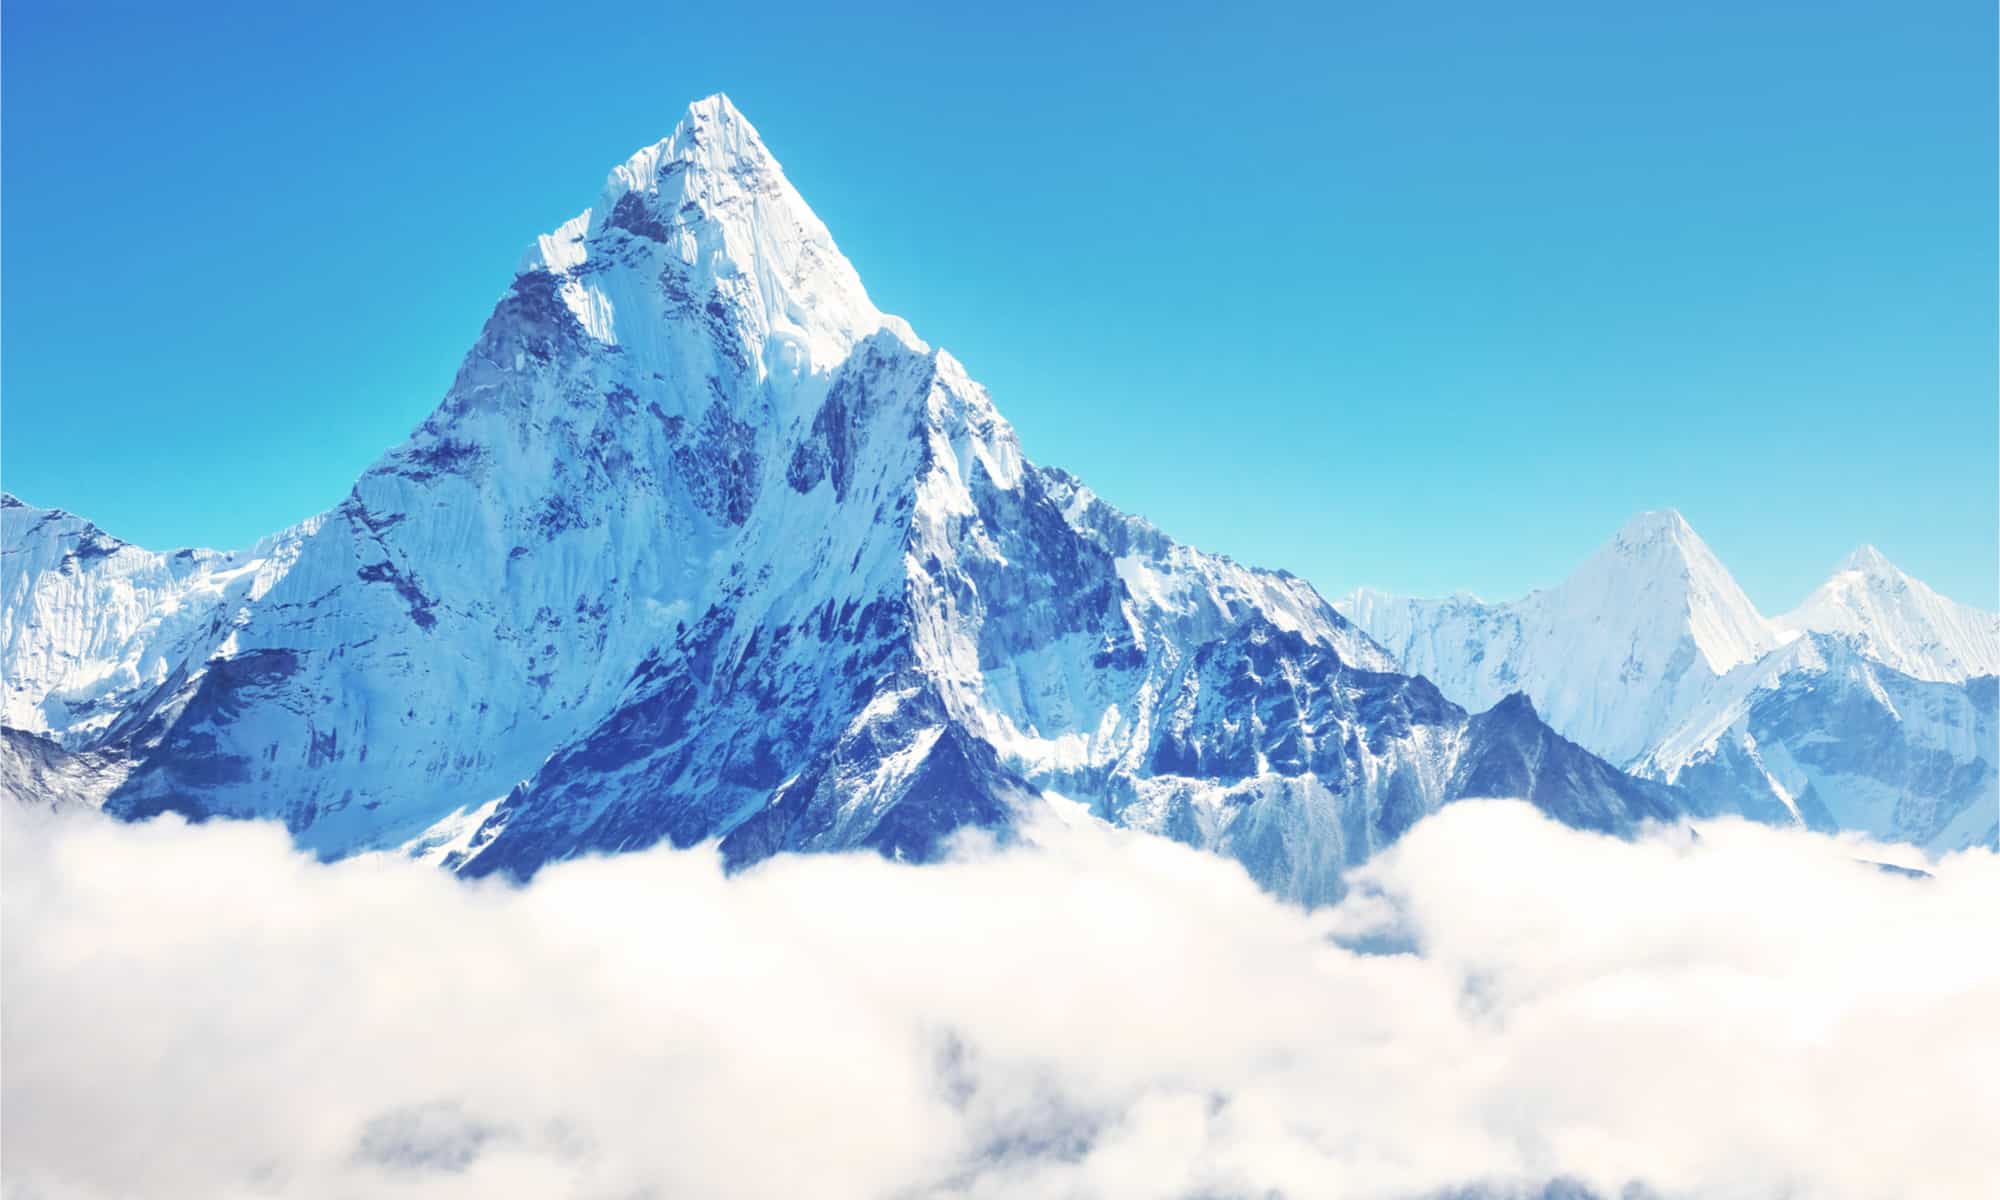 Travel to Nepal, Earth's highest mountain